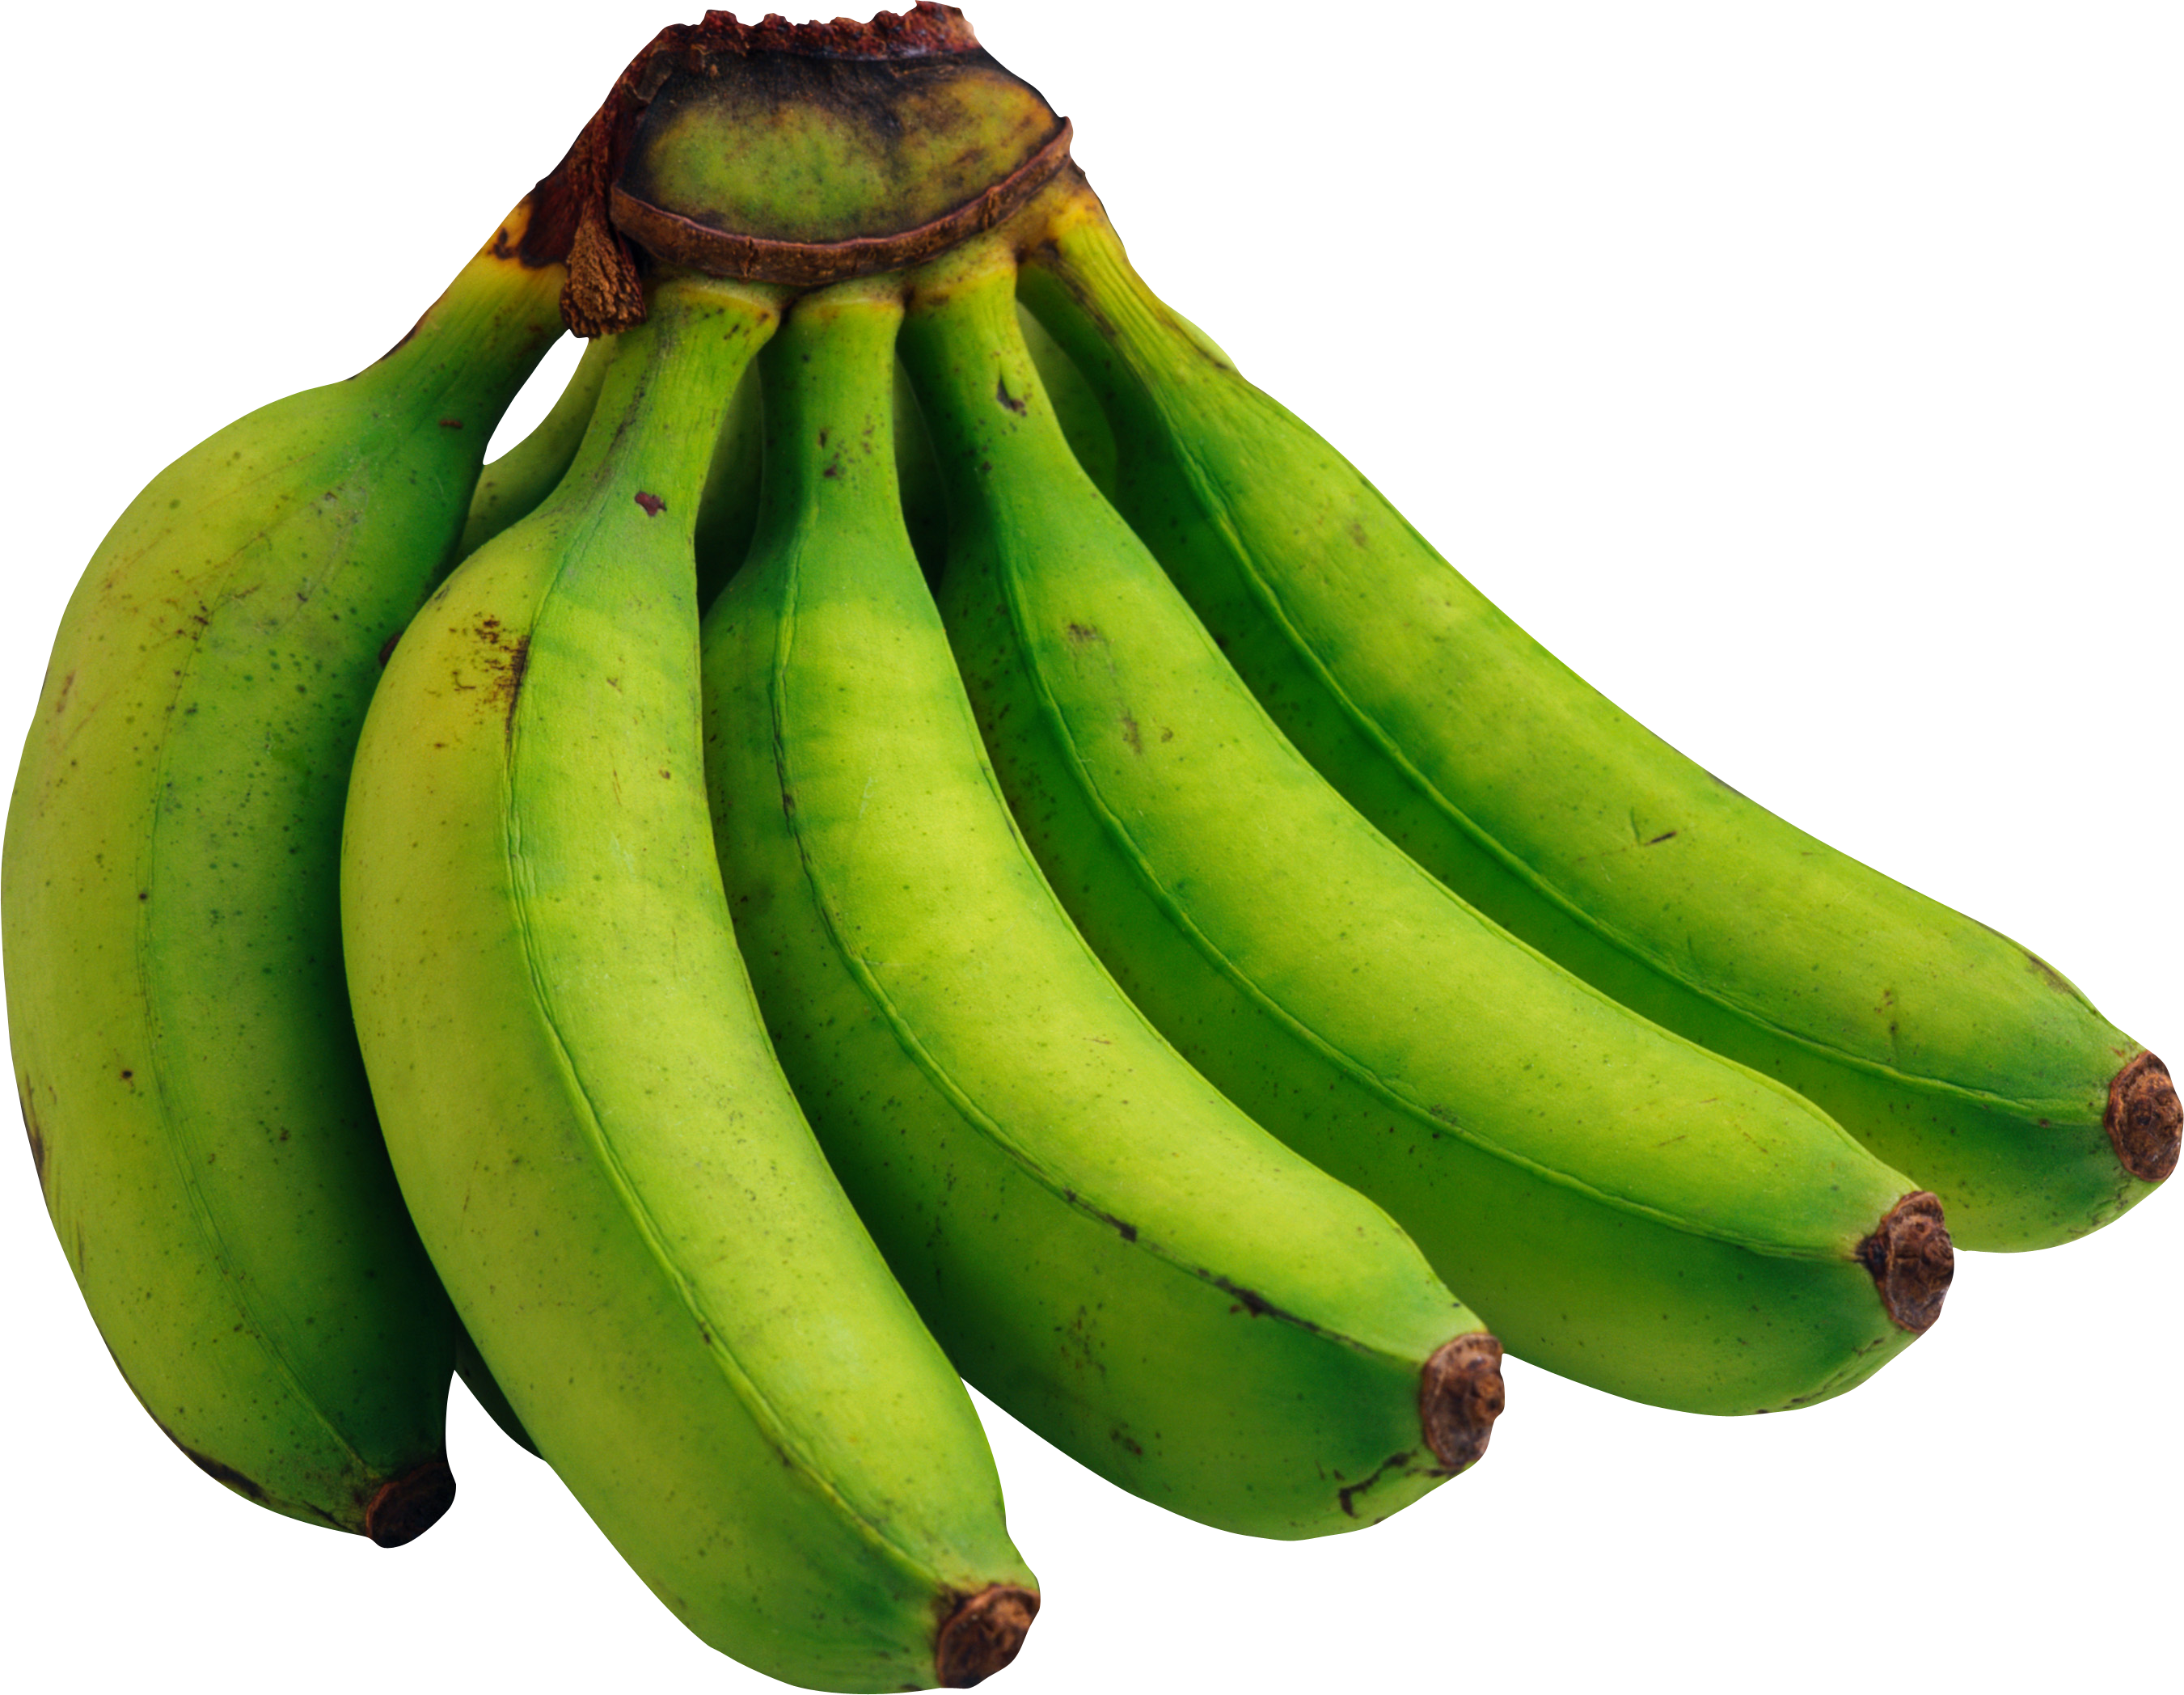 green bananas PNG image, free picture